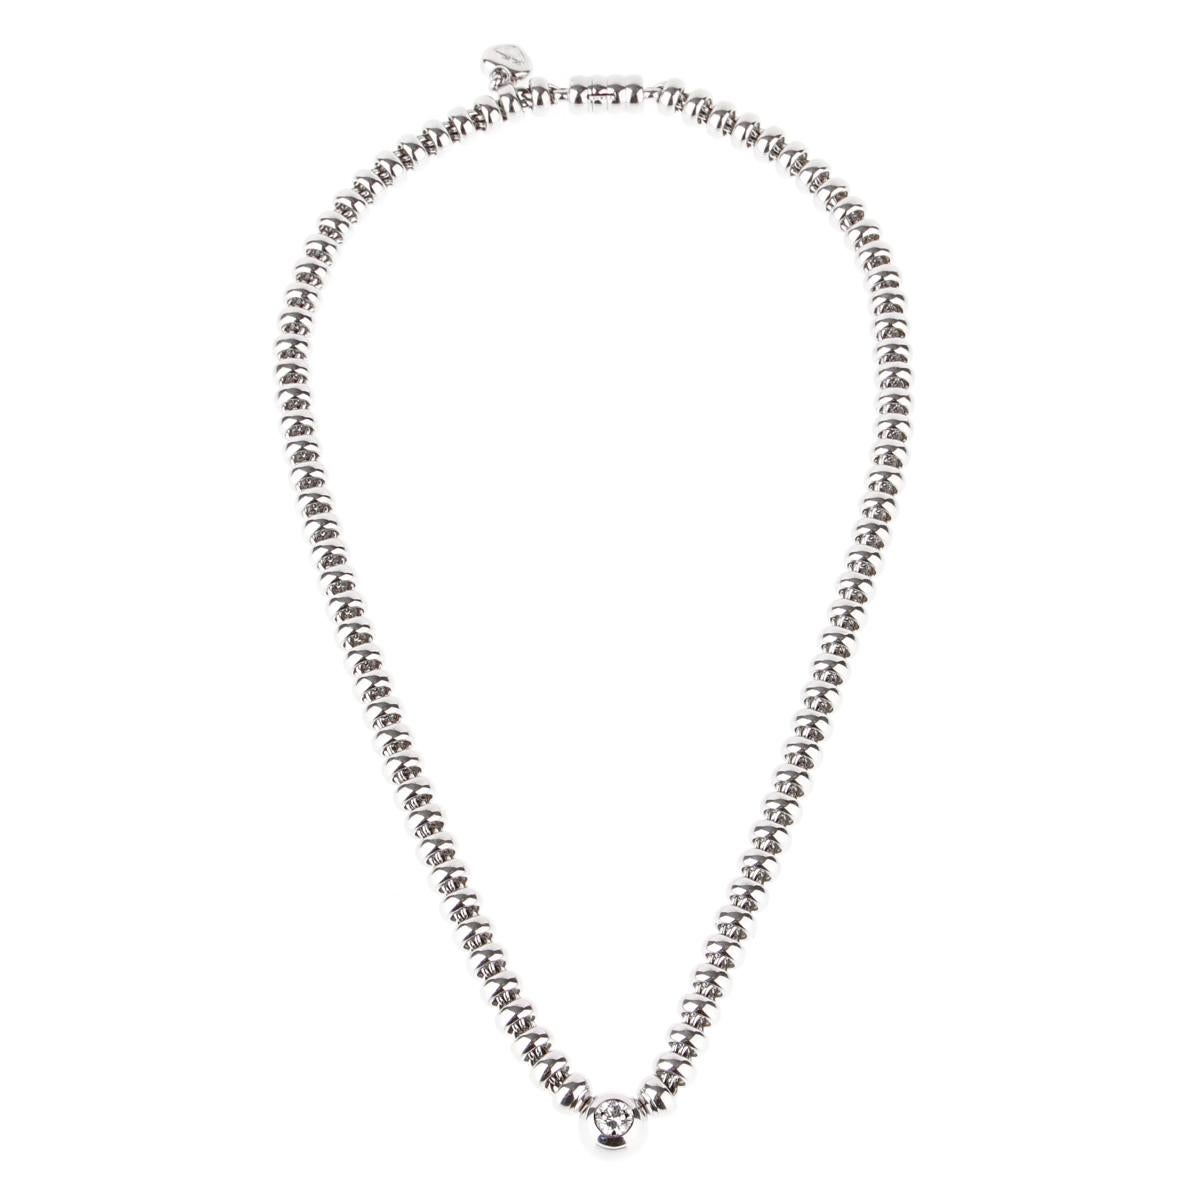 A fabulous authentic Chopard necklace featuring a magnificent .52ct Chopard round brilliant cut diamond set in 18k white gold. Necklace Length 16 1/2